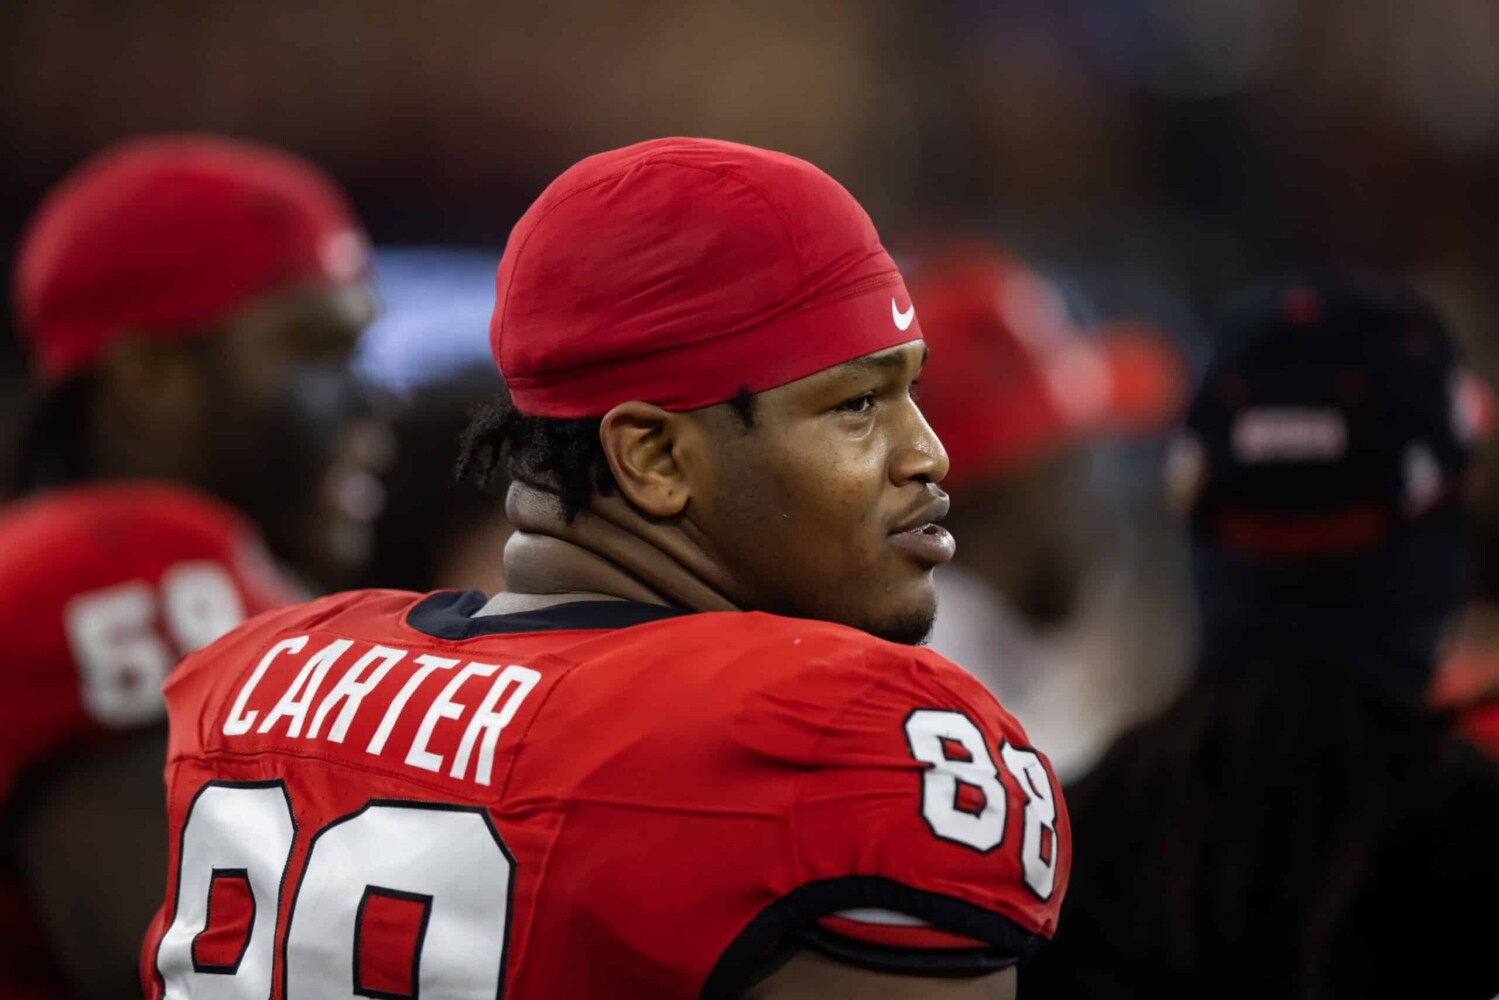 Georgia Bulldogs defensive lineman Jalen Carter with a neutral expression during College Football Playoff.